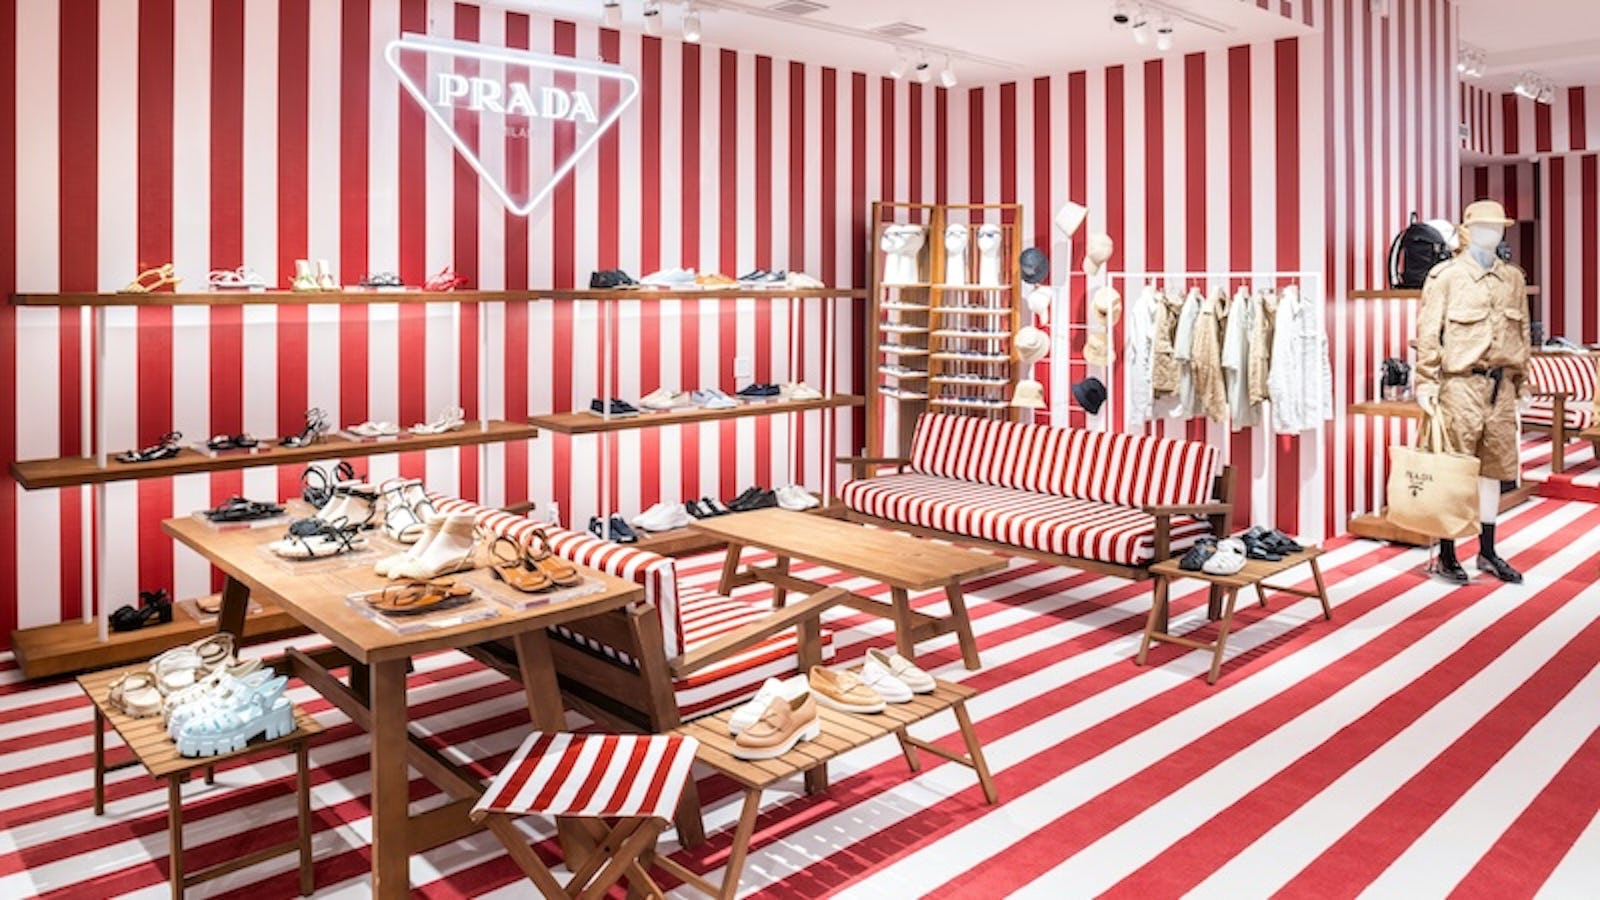 Prada East Hampton store, re-opened for the summer: The 1600-square-foot store features red-and-ivory retro stripes from floor to ceiling, making it the perfect background for your next Instagram post.